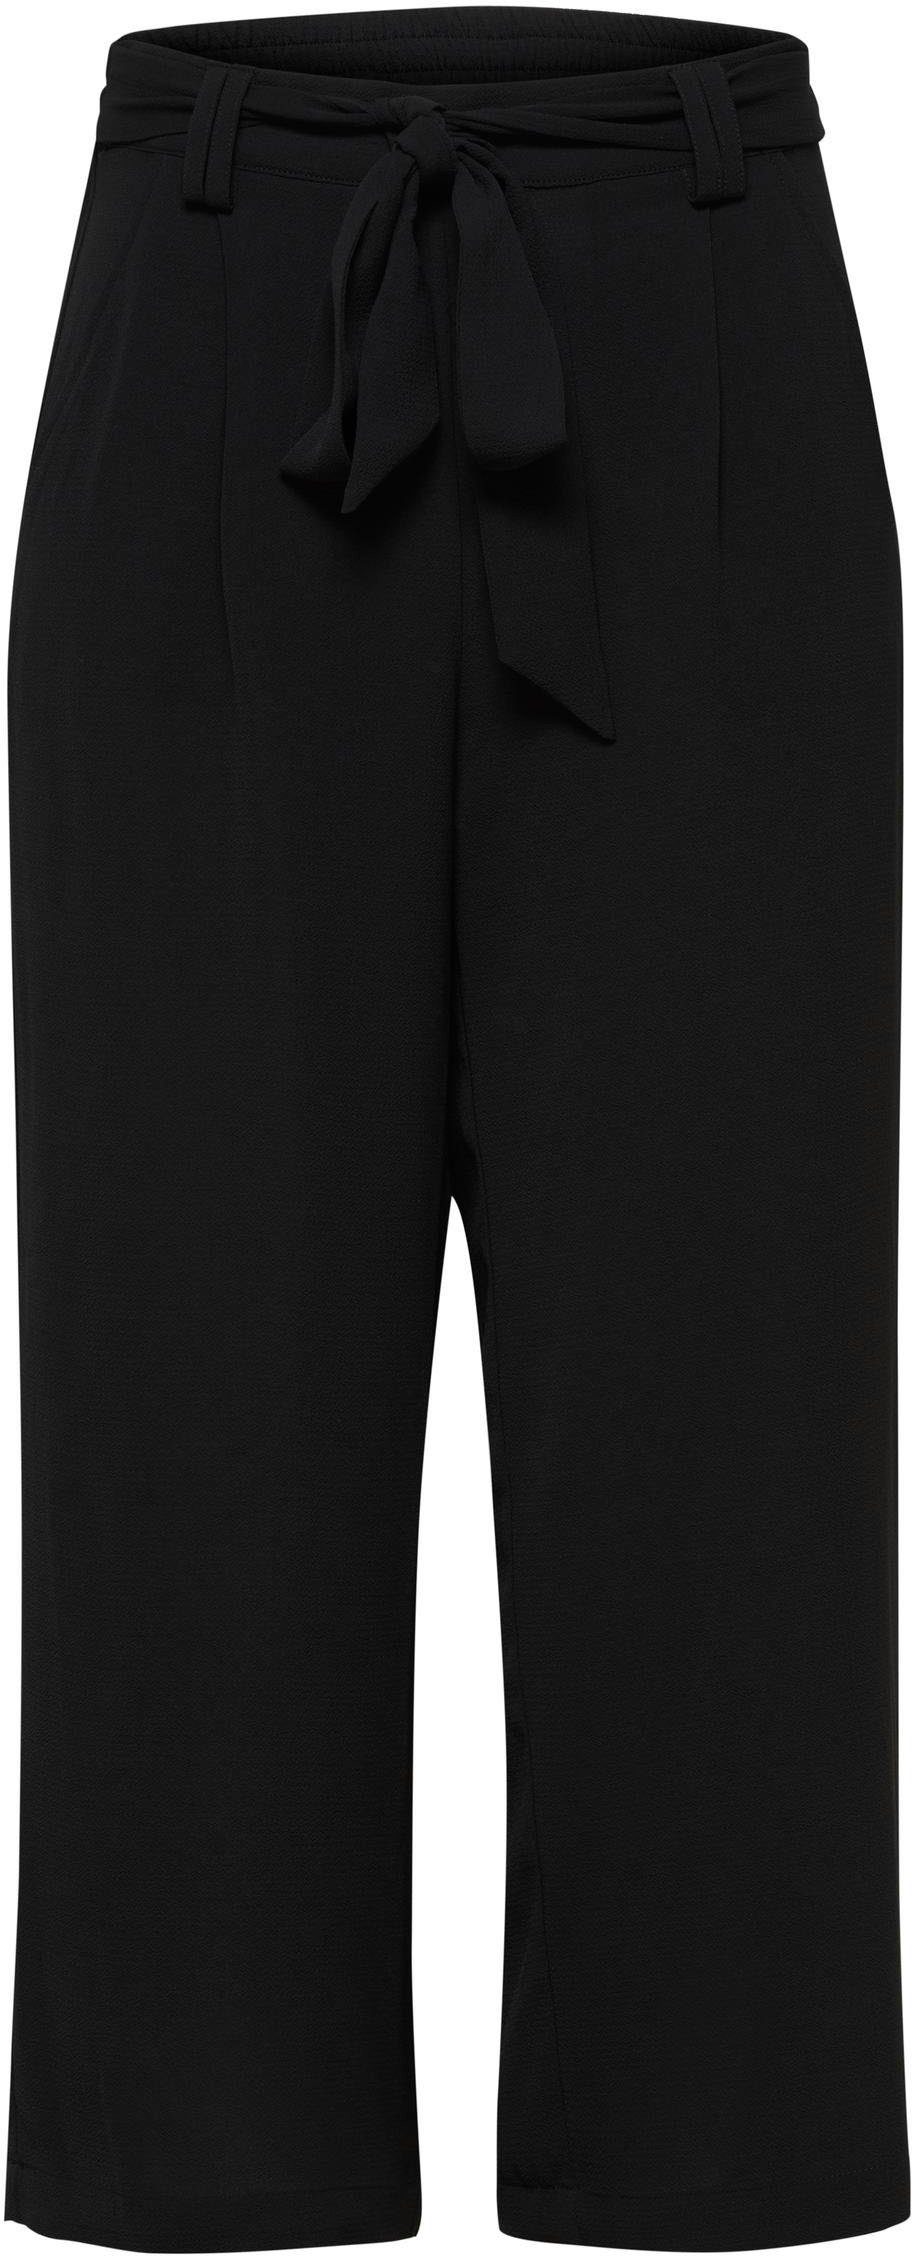 CULOTTE PANT Black NOOS oder gestreiftem PTM uni in PALAZZO Palazzohose ONLY ONLWINNER Design